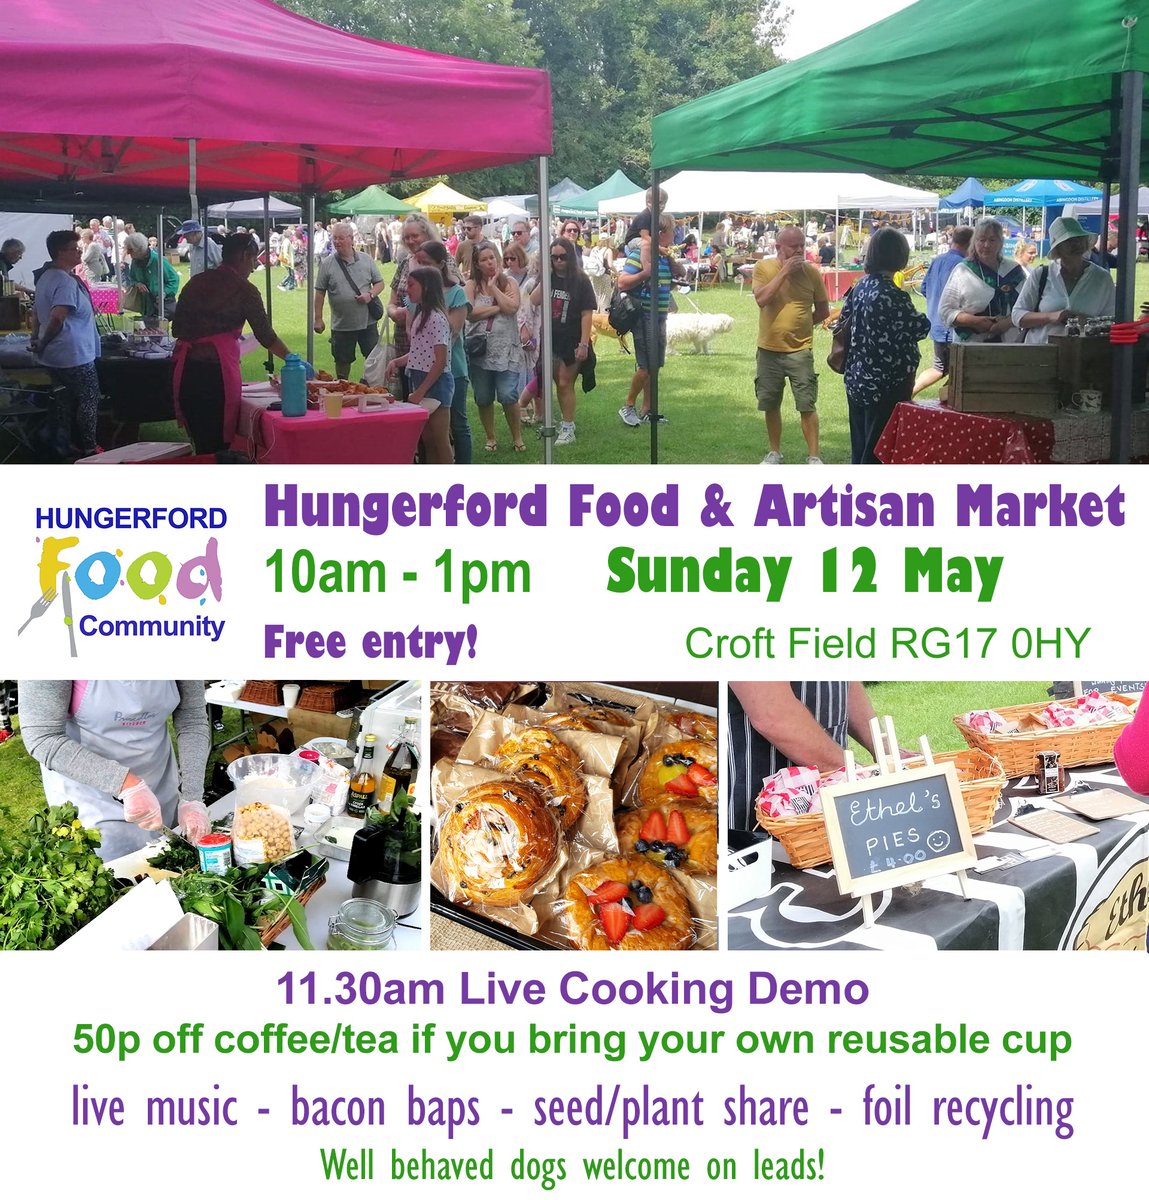 Join us for our next market this Sun 12 May - fab local stalls, street food, live music & cooking demo. Bring your reusable cup for 50p off hot drinks, foil,aluminium & IT tech for recycling, plants/seeds/produce for sharing. #sustainablemarket @ILoveHungerford